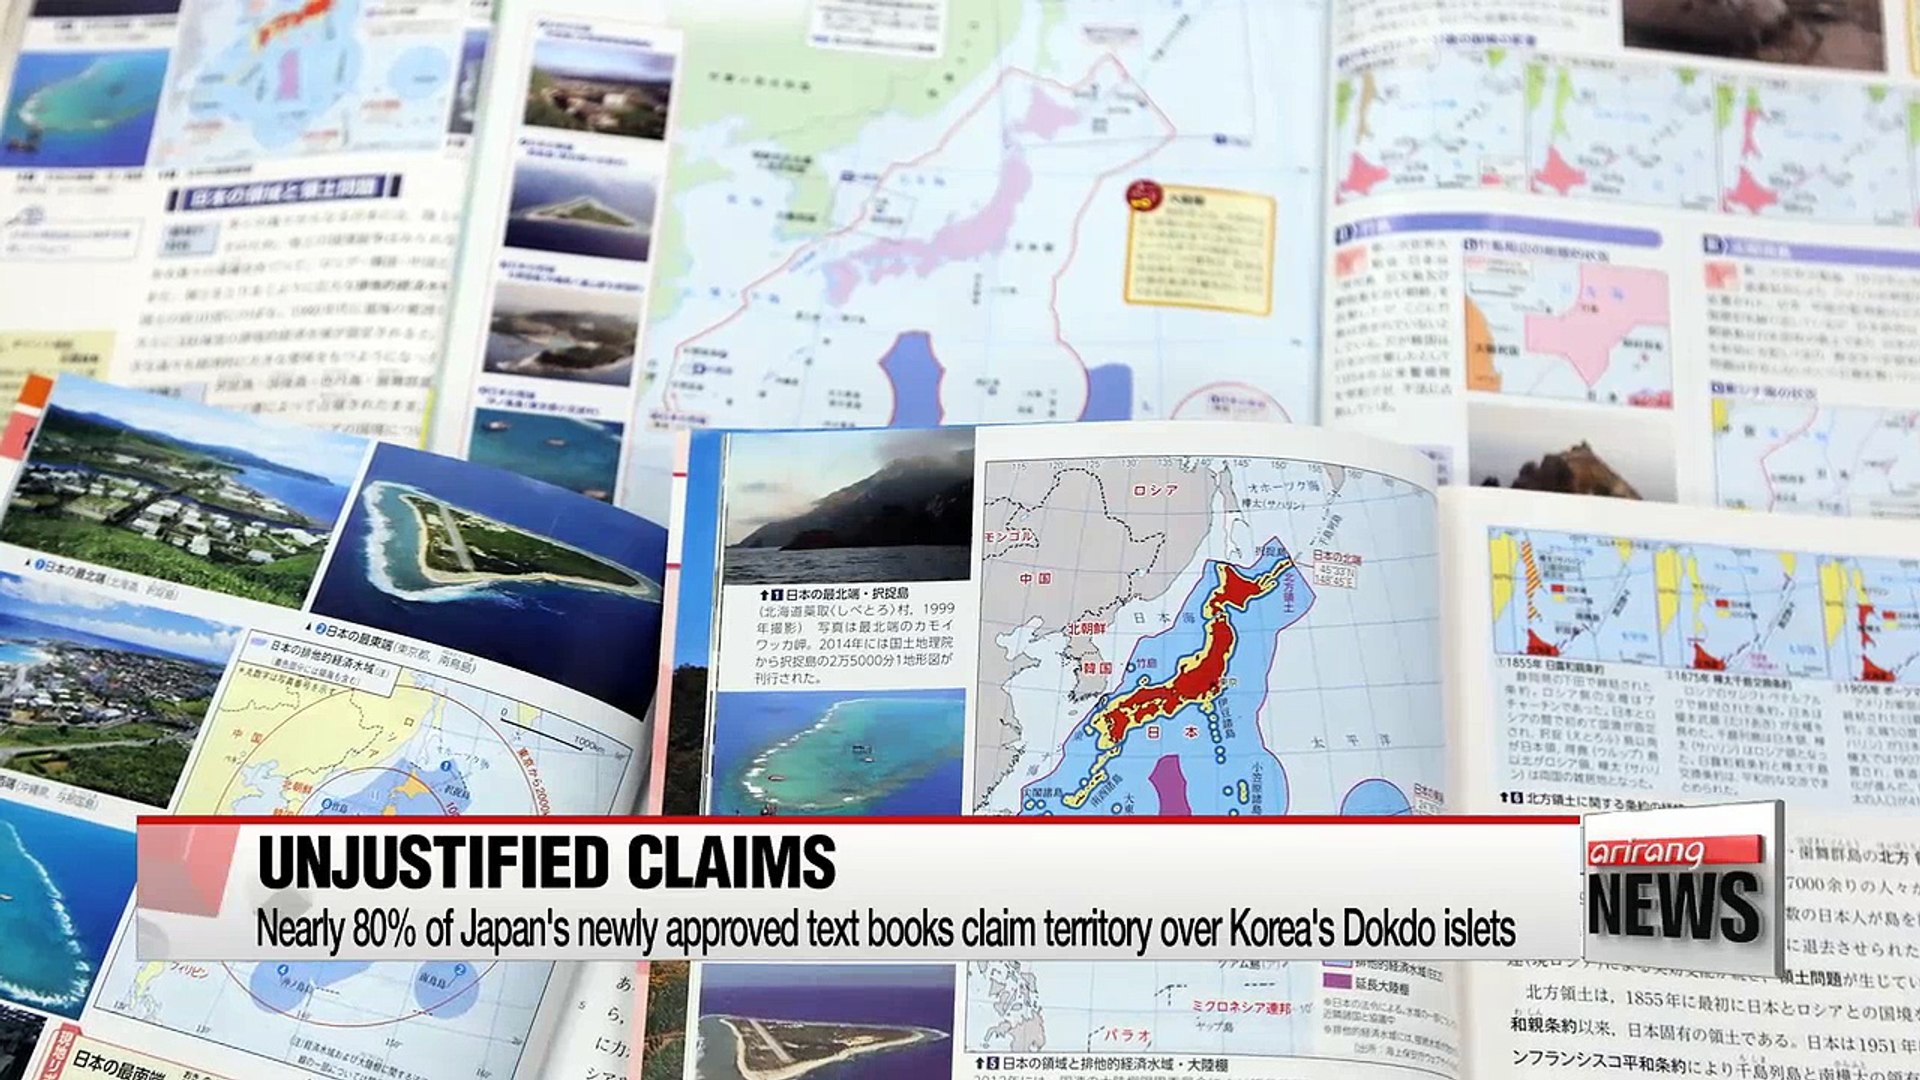 80 Of Authorized Japanese Text Books Claim Territory Over Korea S Eastermost Dokdo Islets Video Dailymotion